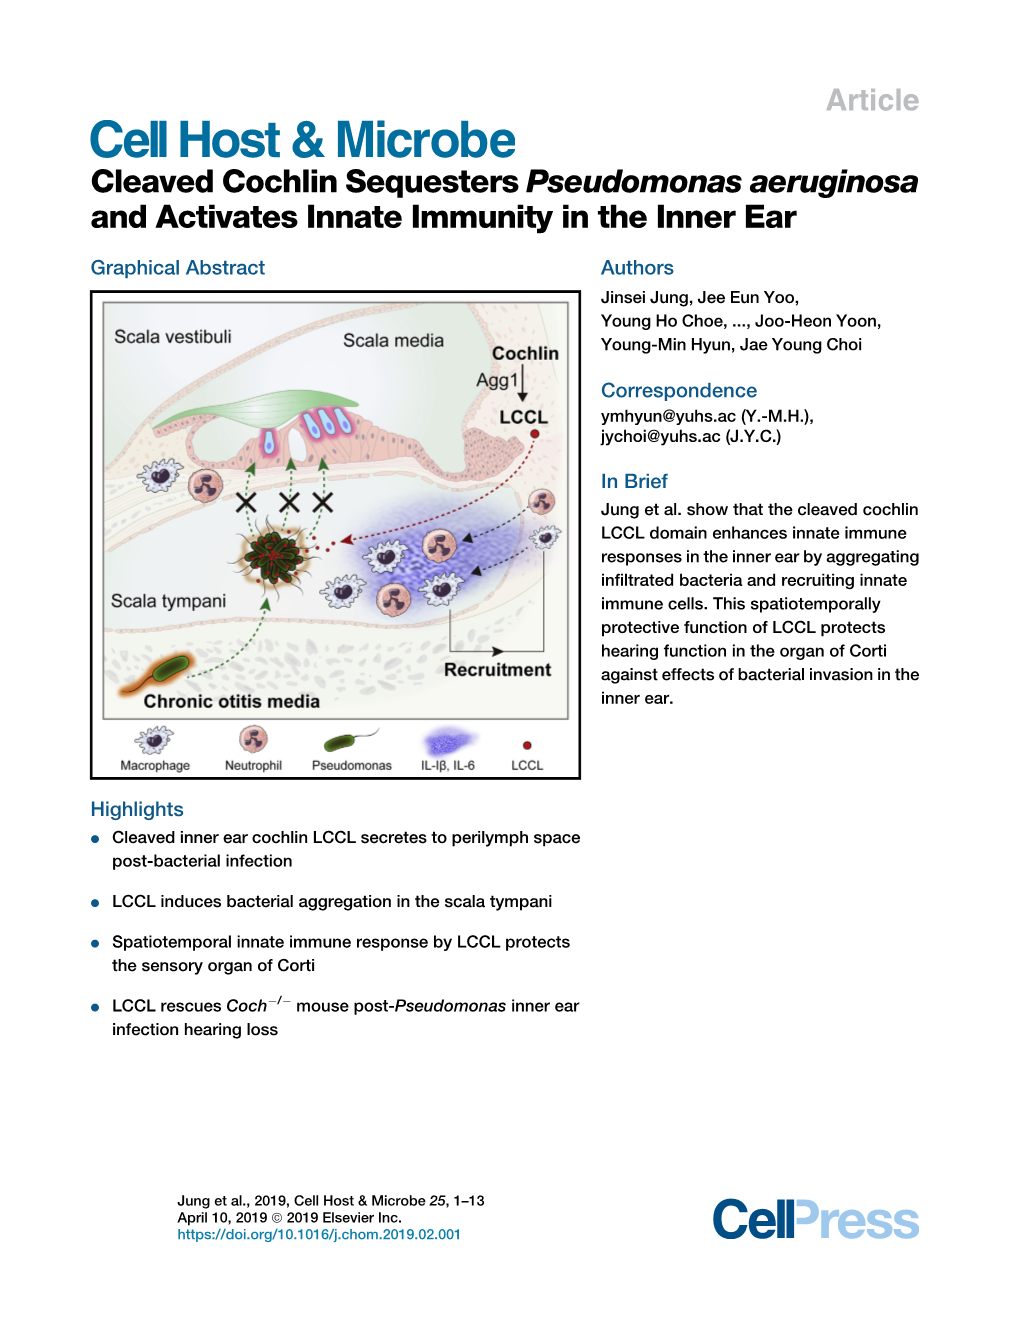 Cleaved Cochlin Sequesters Pseudomonas Aeruginosa and Activates Innate Immunity in the Inner Ear